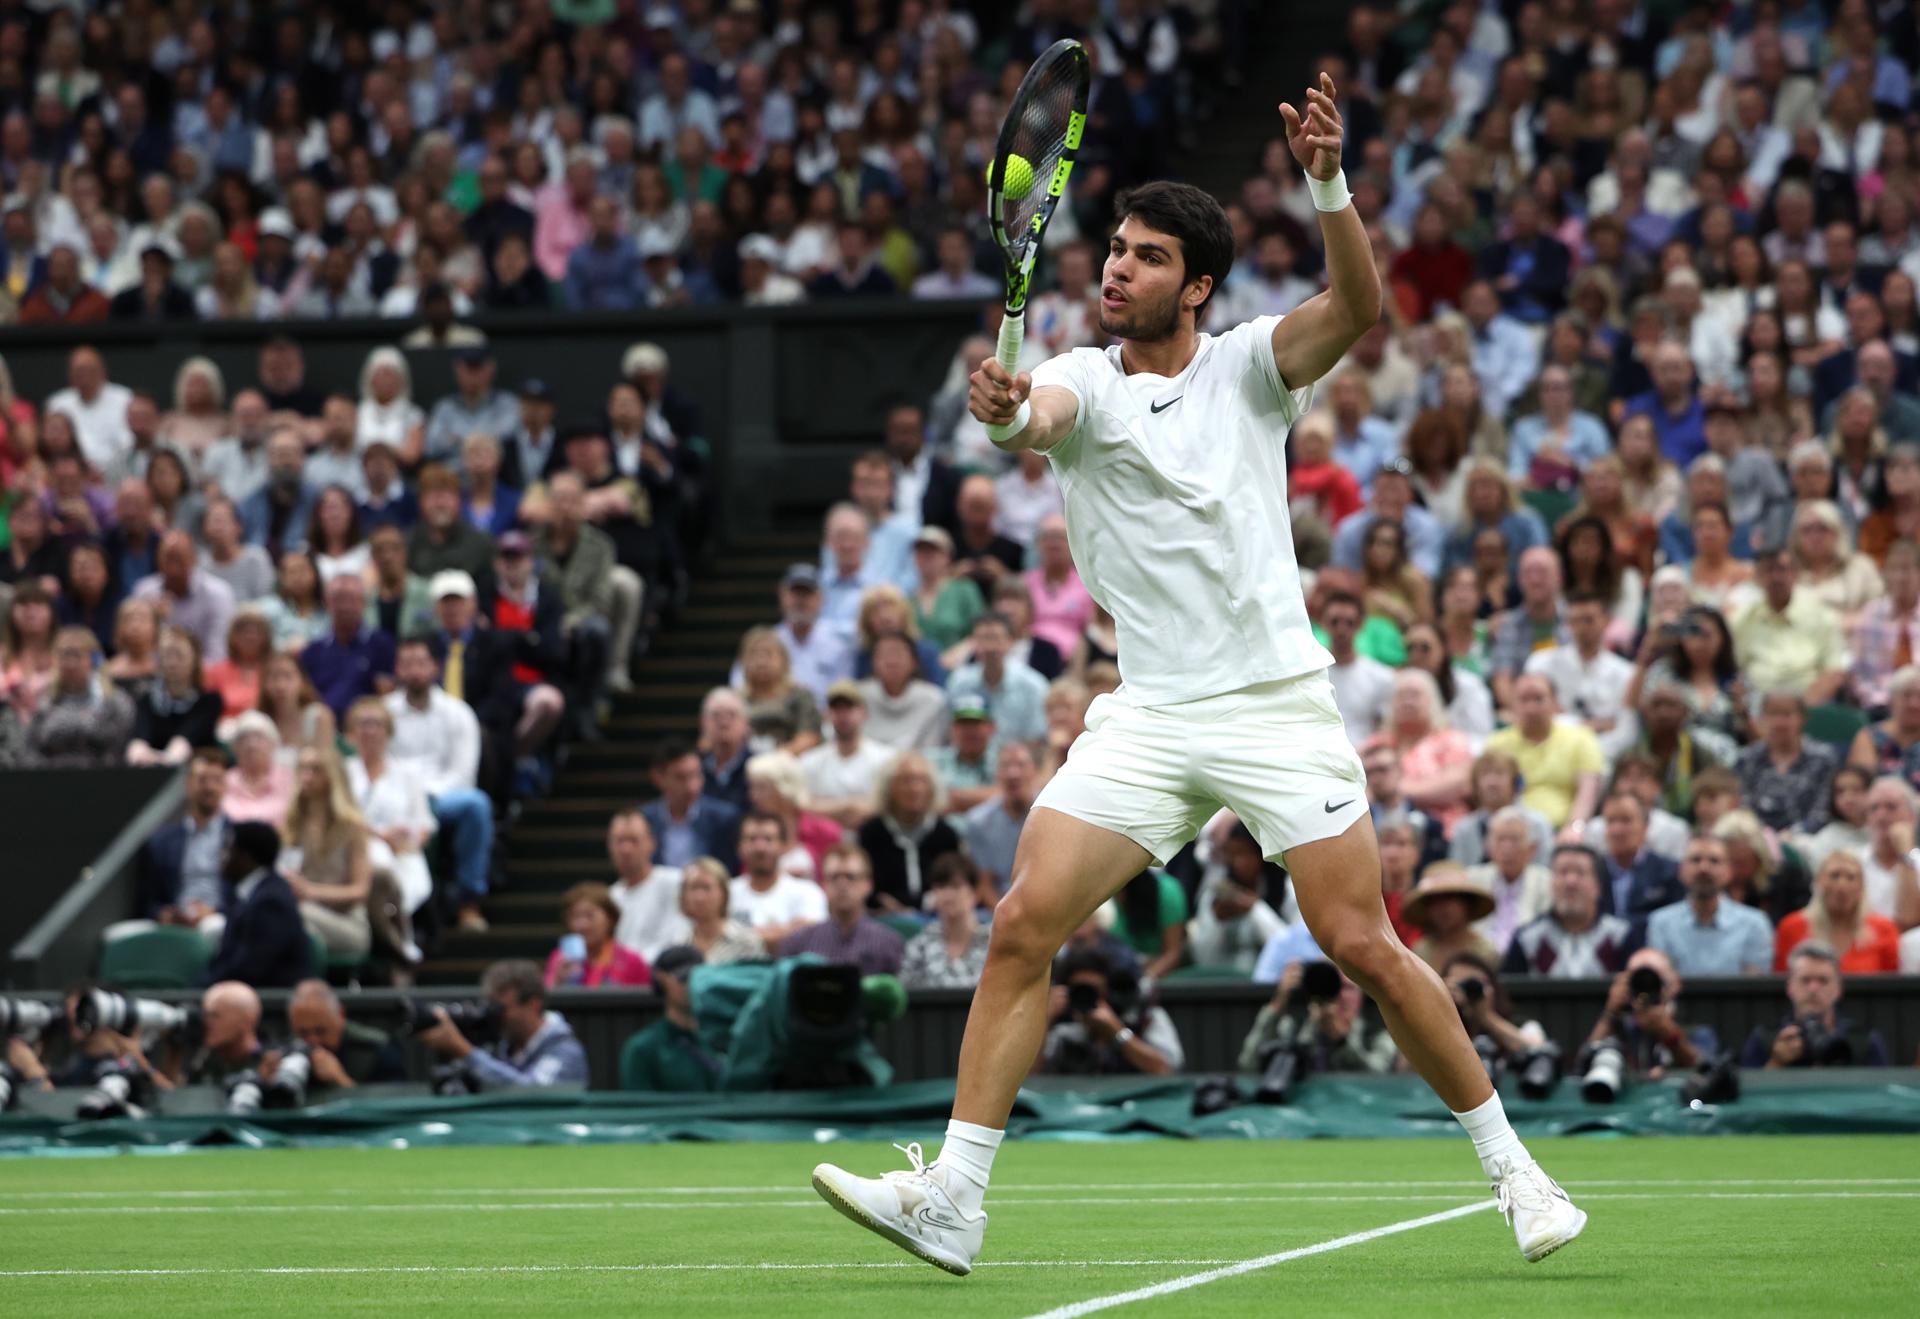 Spanish world No. 1 Carlos Alcaraz hits a backhand volley during his Wimbledon semifinal match against third-seeded Russian Daniil Medvedev on 14 July 2023 in London, United Kingdom. Alcaraz won 6-3, 6-3, 6-3. EFE/EPA/ISABEL INFANTES
